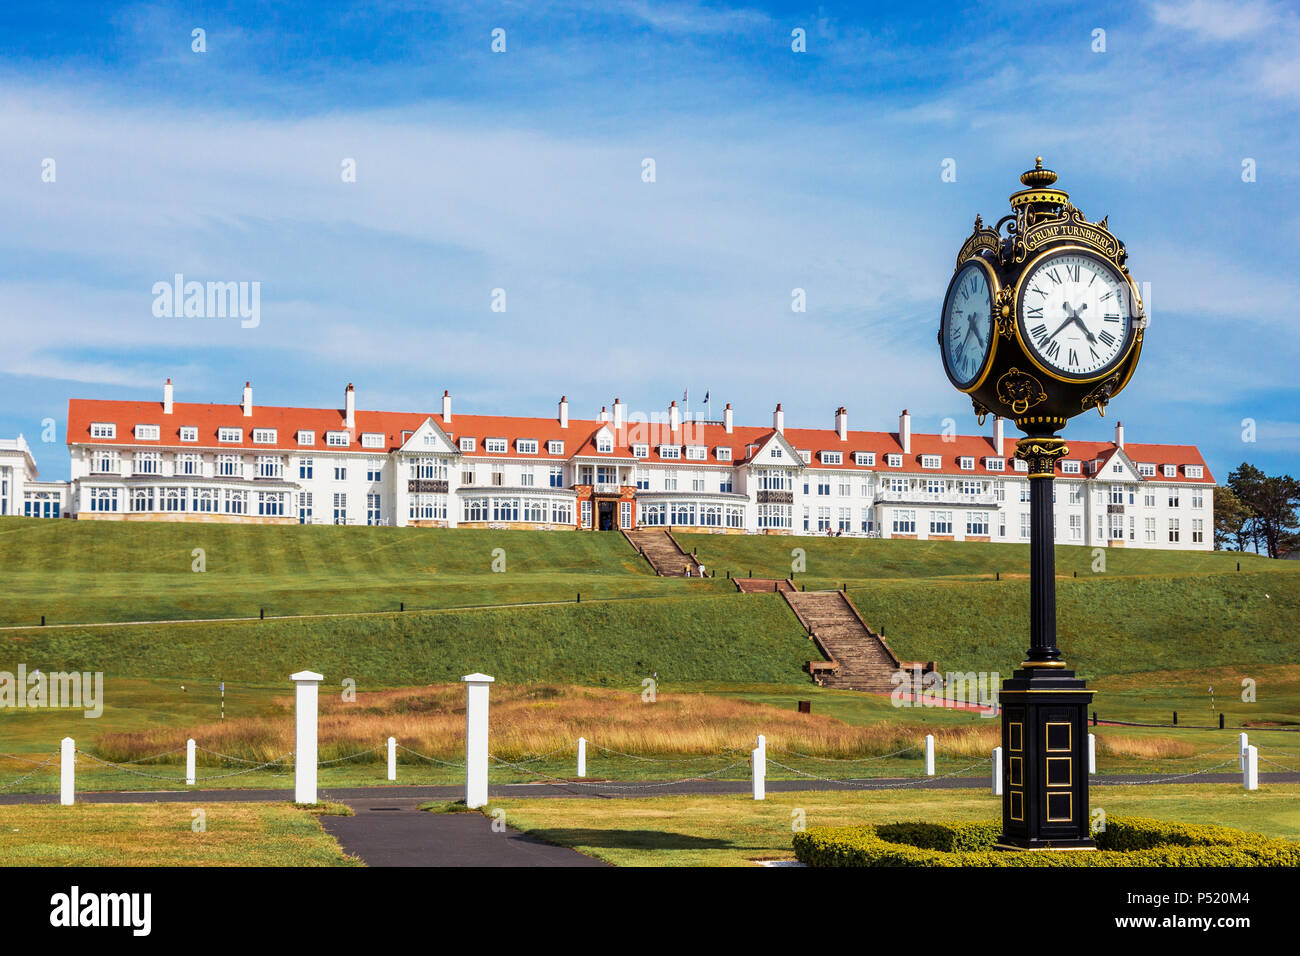 Ornate clock outside the Trump Turnberry hotel at Turnberry, Ayrshire, Scotland Stock Photo